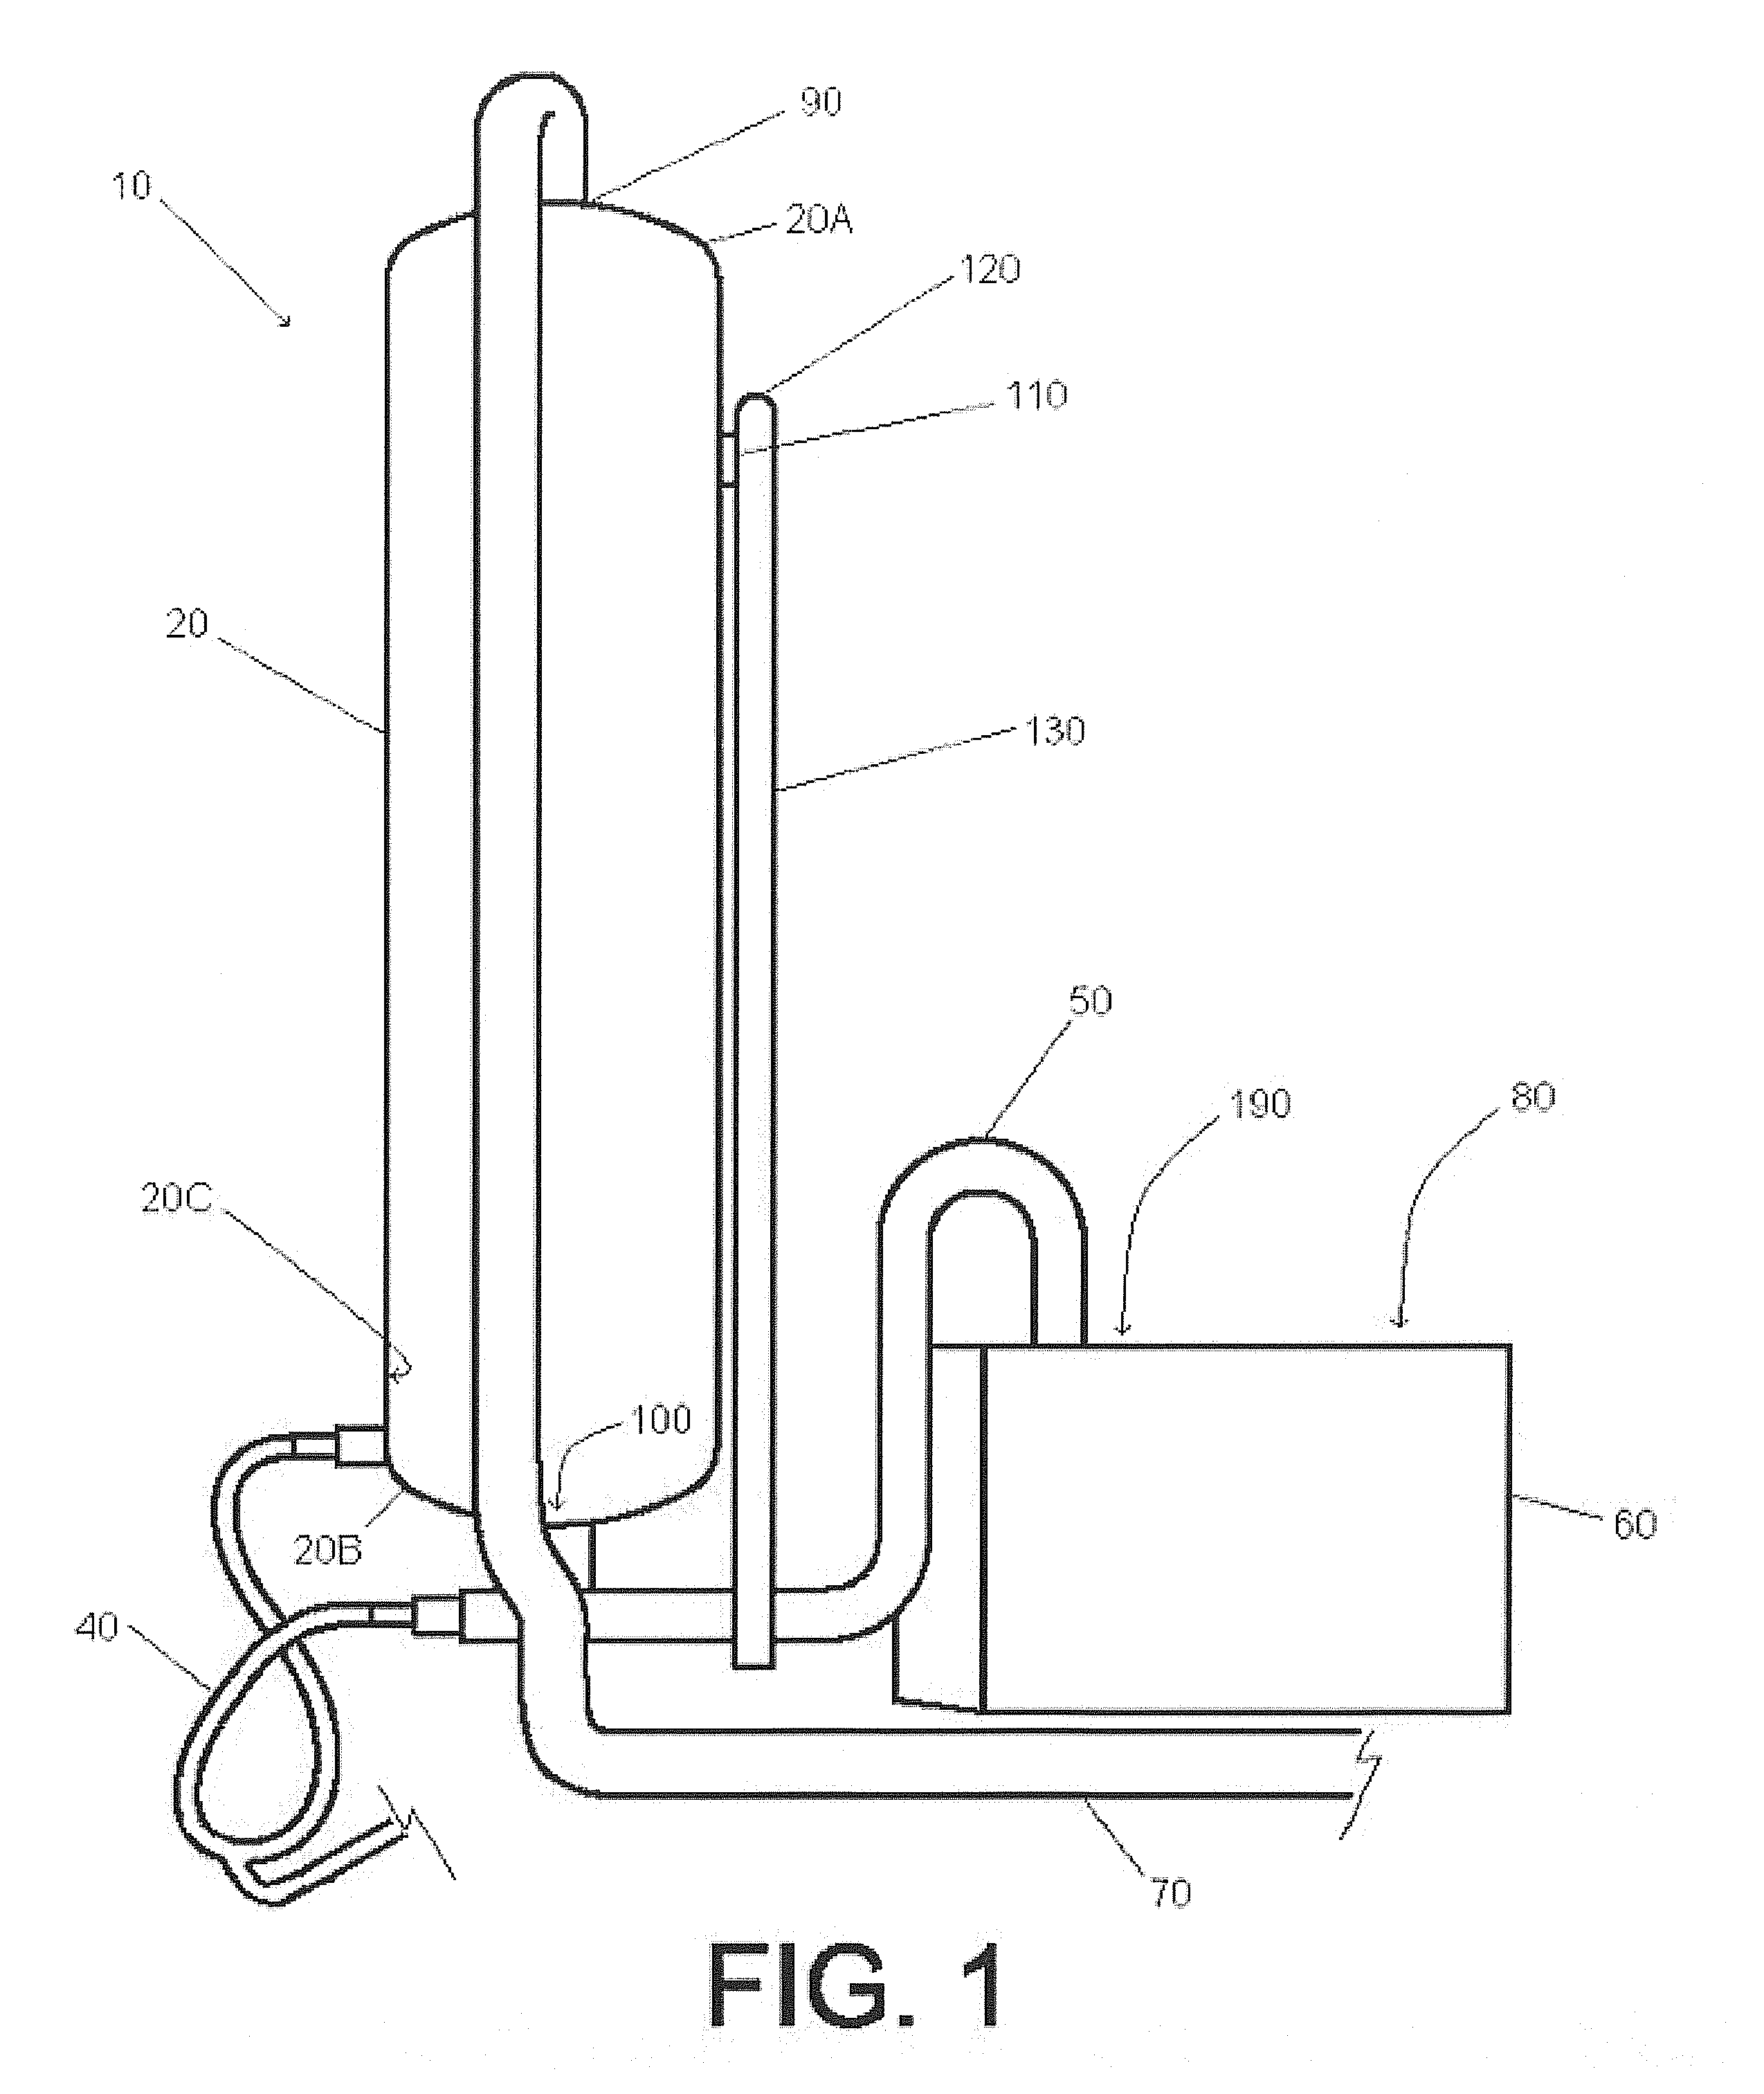 Oil skimming apparatus and method for using same